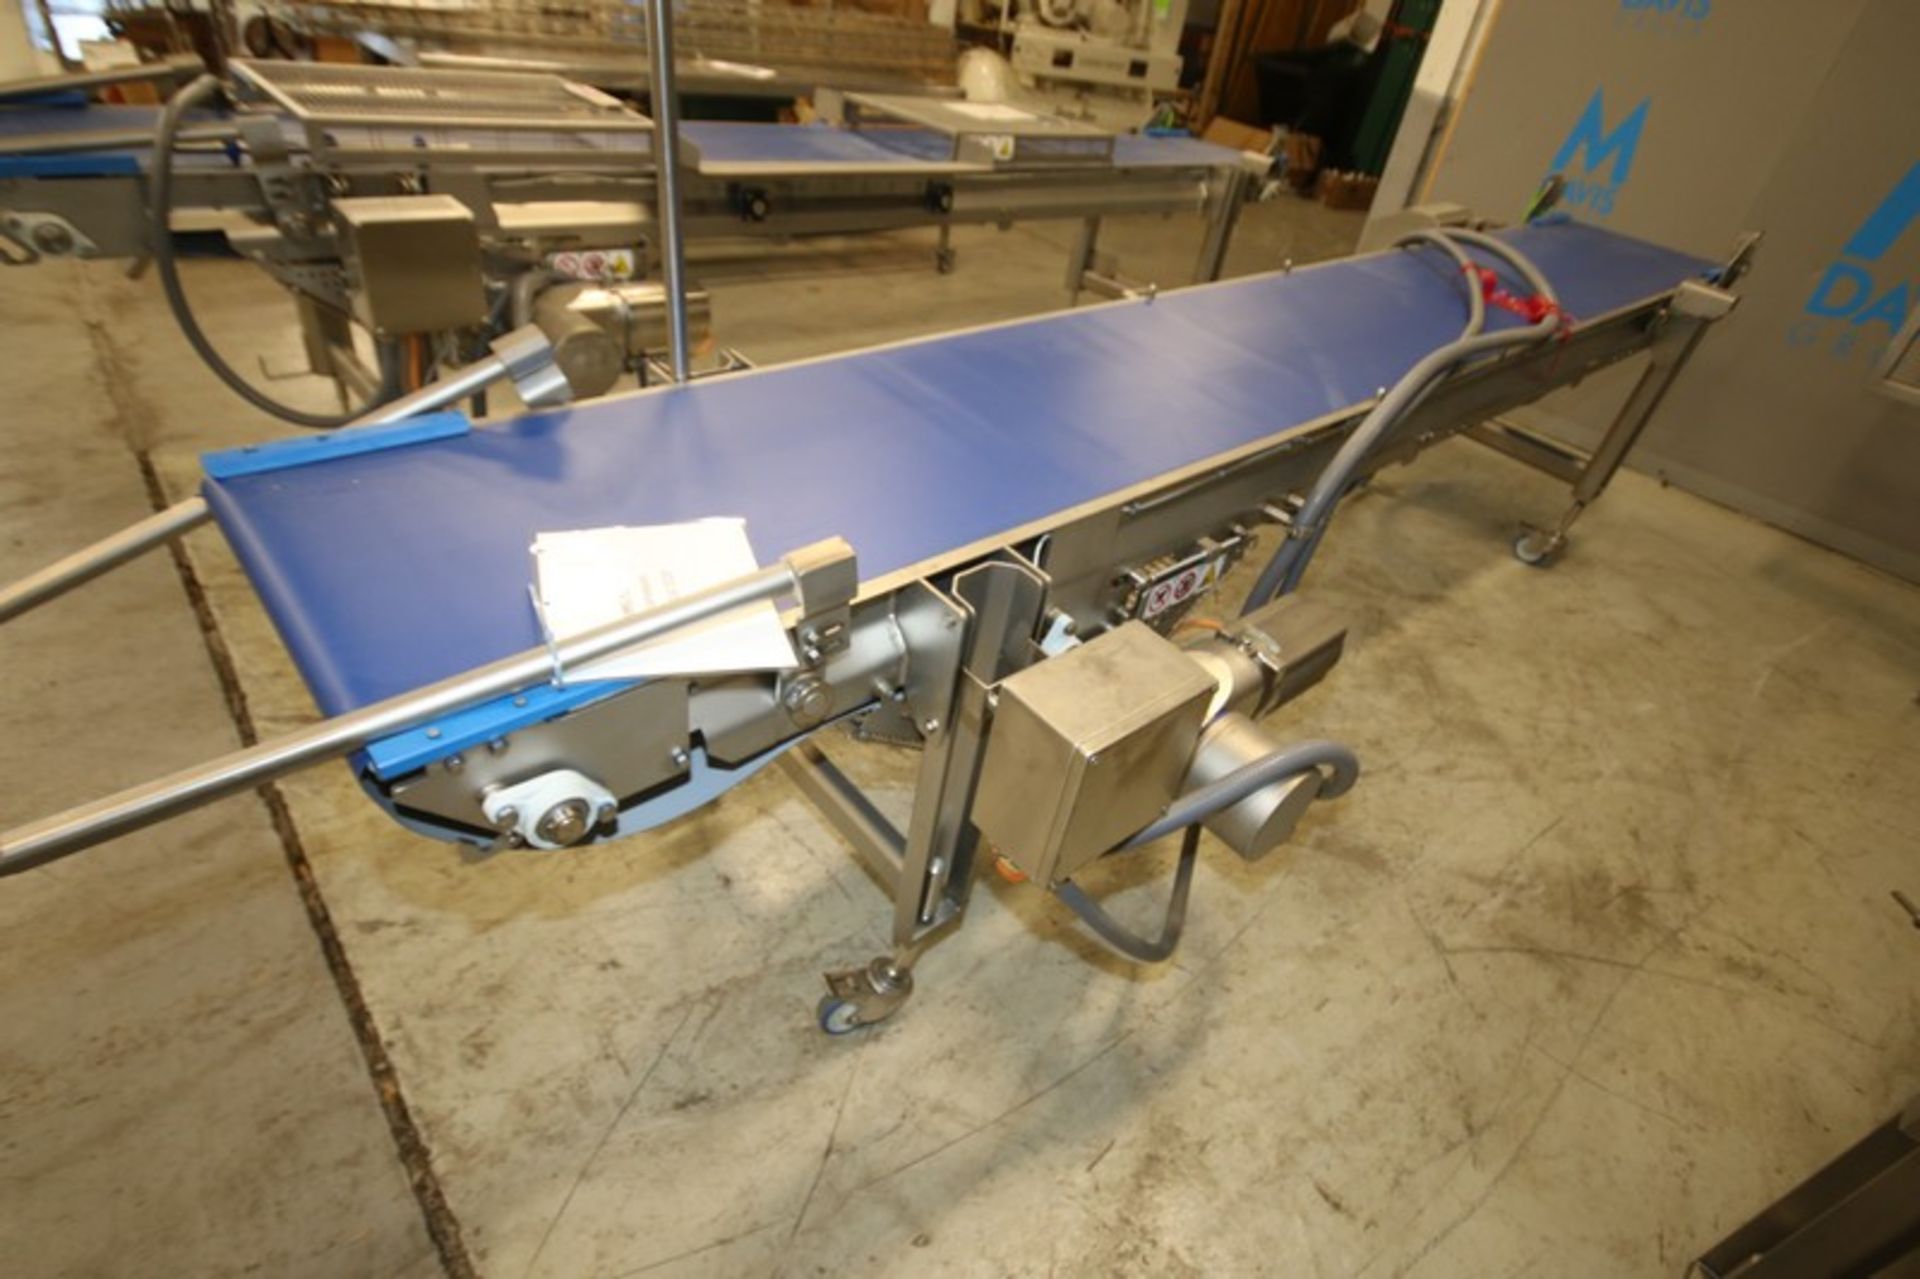 2019 Alimec Aprox. 149" L x 19.5" W x 33" H S/S Belt Conveyor, SN 813-59, with Bauer S/S Drive Motor - Image 3 of 4